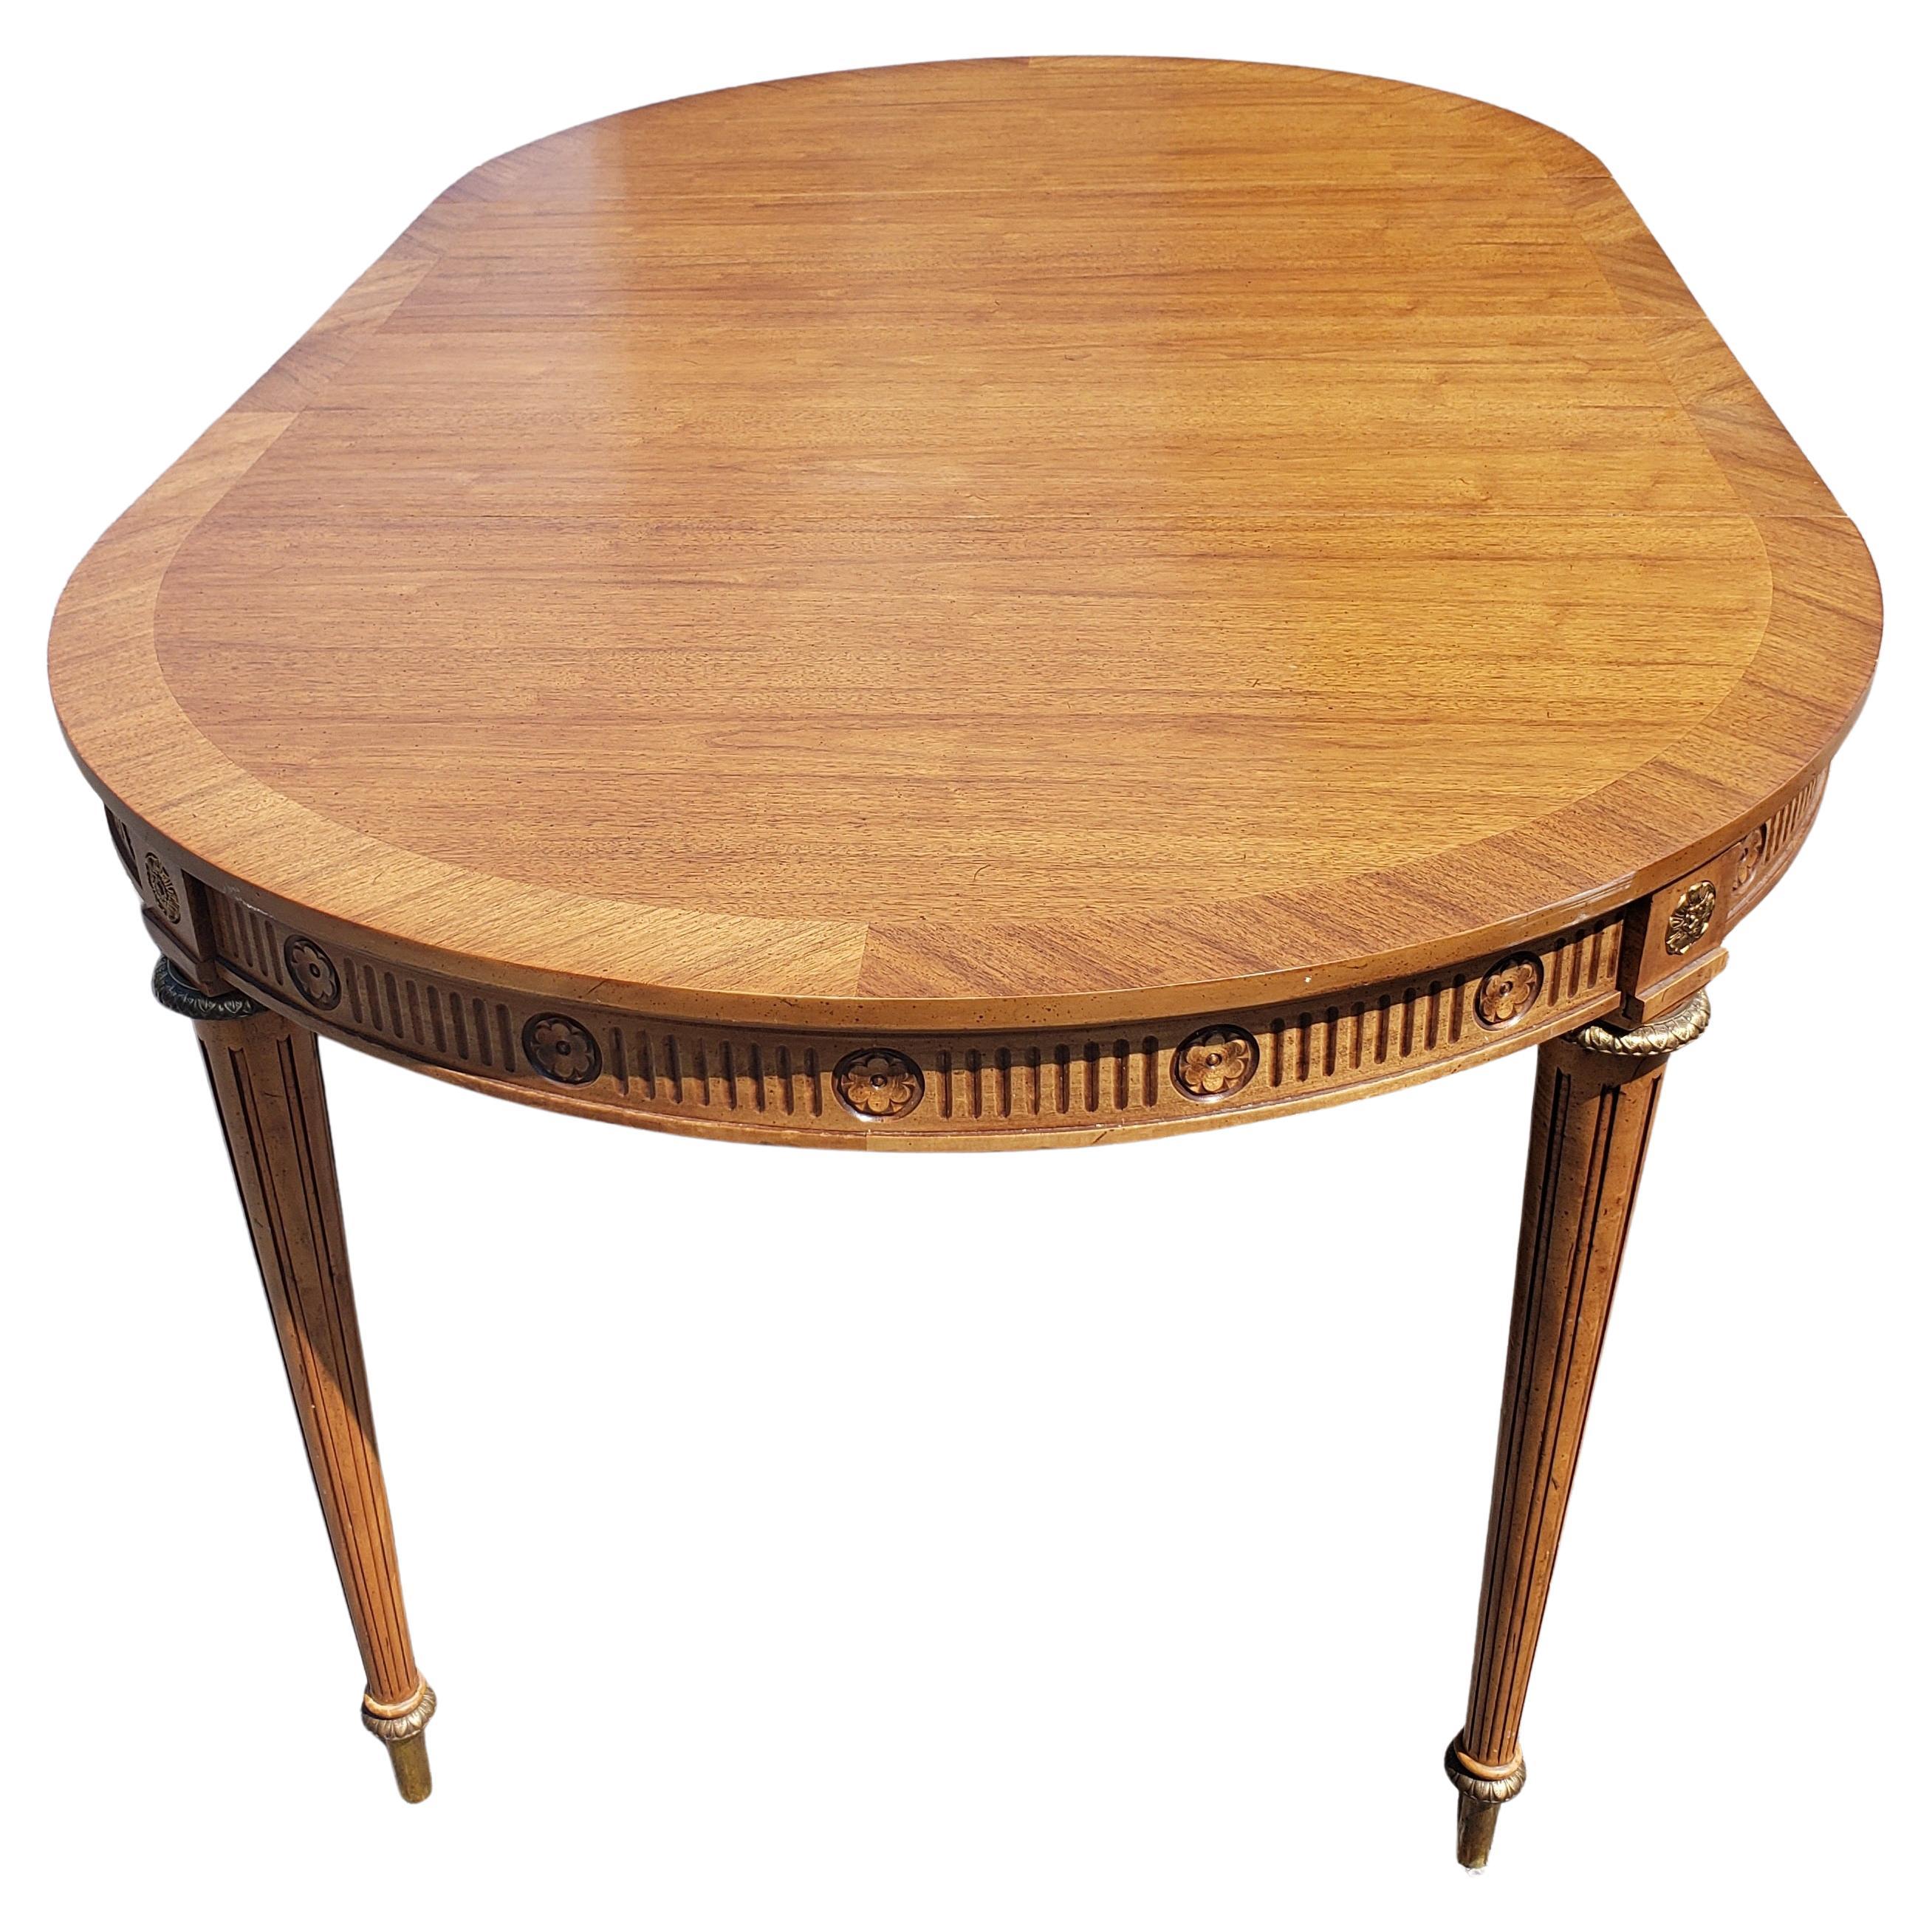 Veneer J.L. Metz Furniture French Walnut and Brass Extension Dining Table with 2 Leaves For Sale